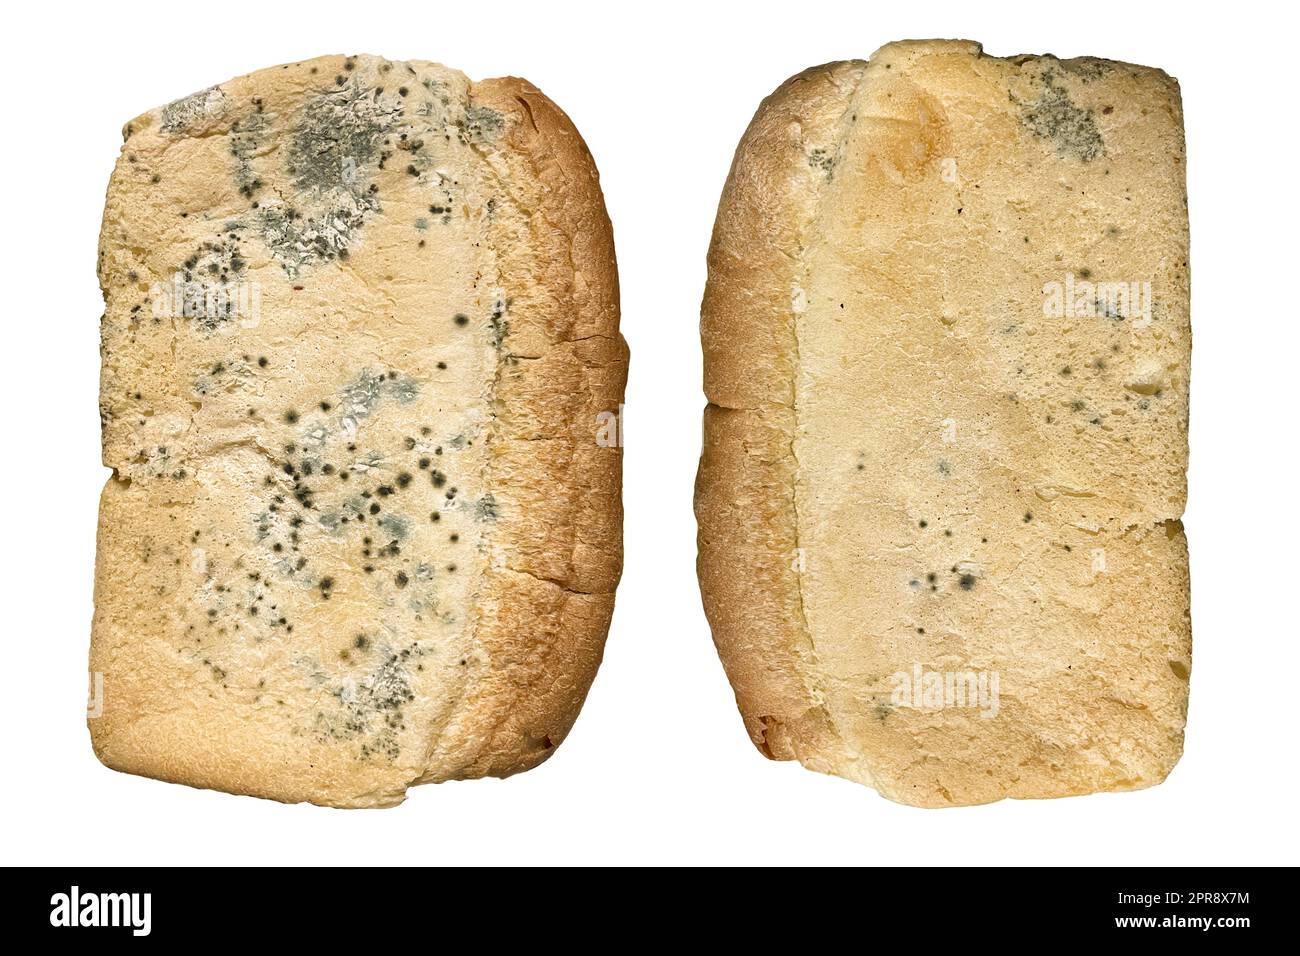 moldy loaf of white bread on a white background. Stock Photo